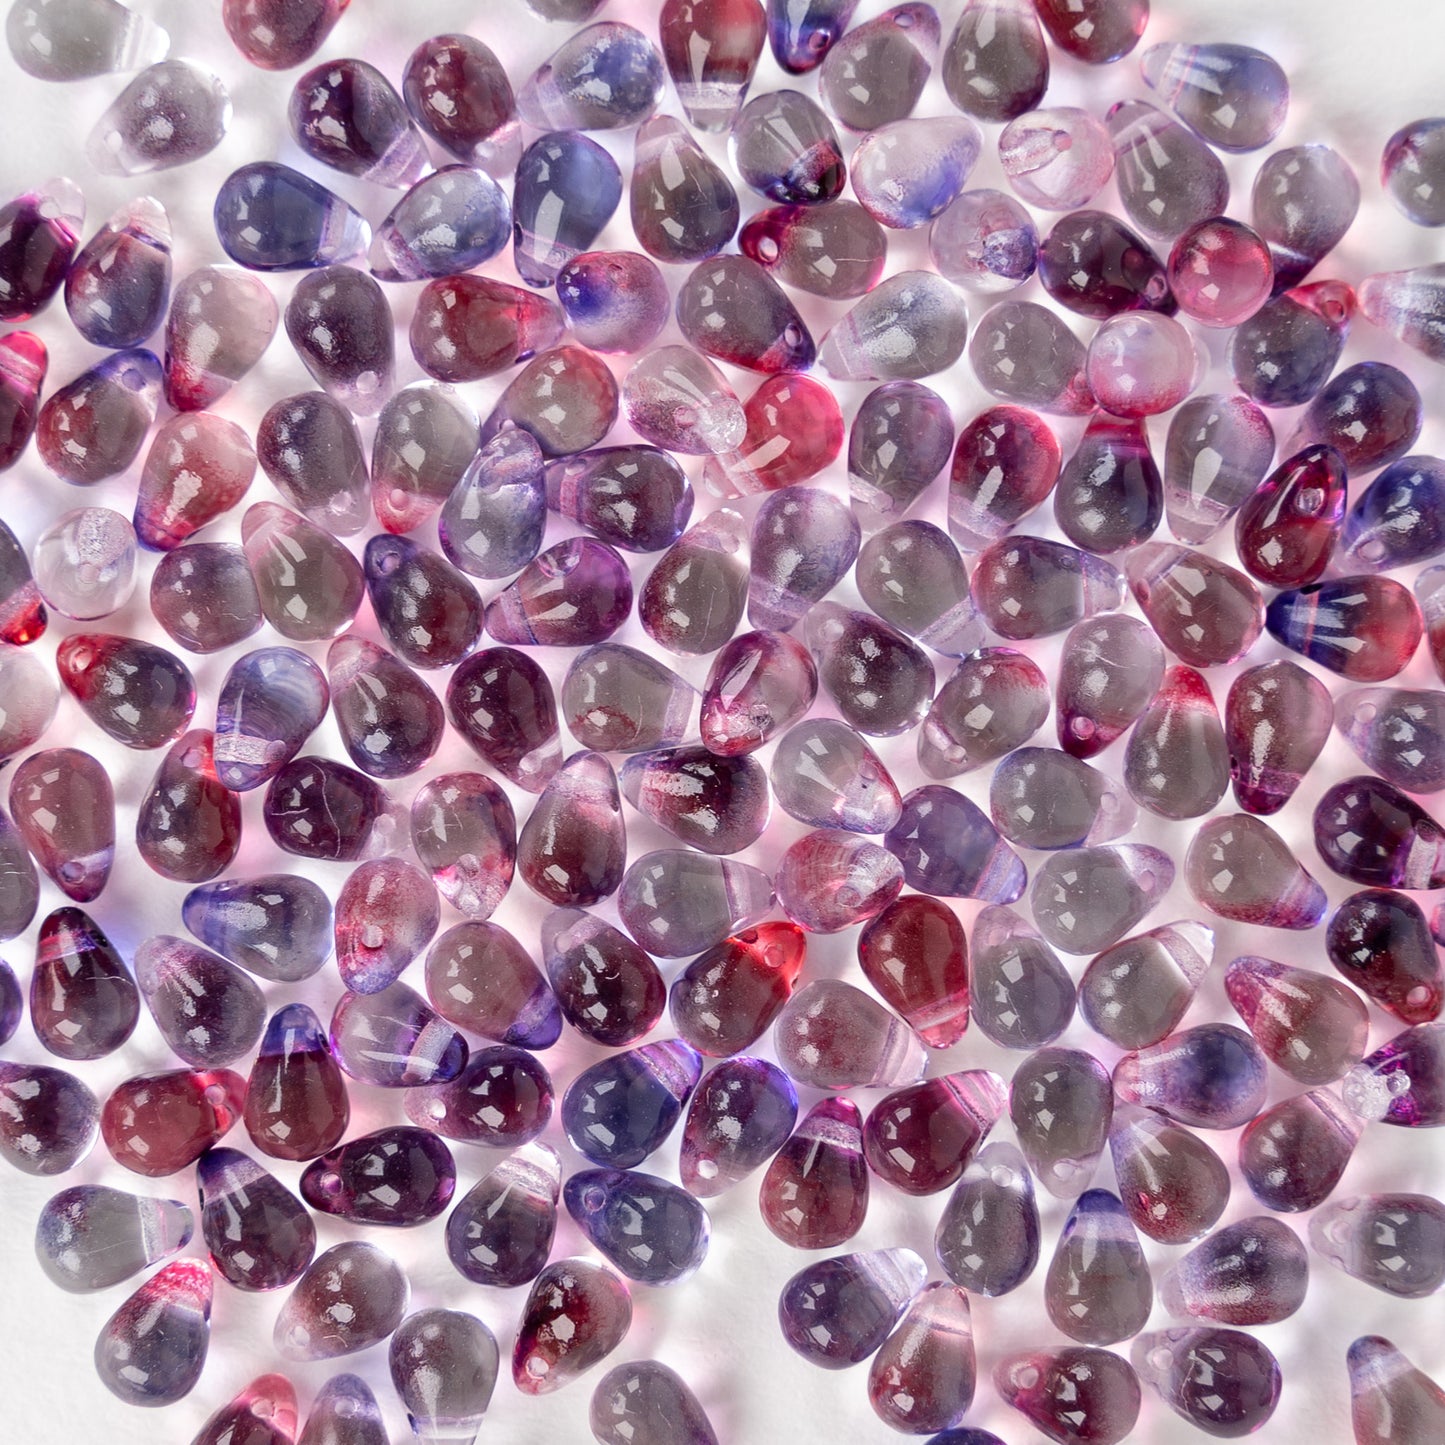 4x6mm and 5x7mm Glass Teardrop Beads - Transparent Purple Pink Mix ~ 100 beads